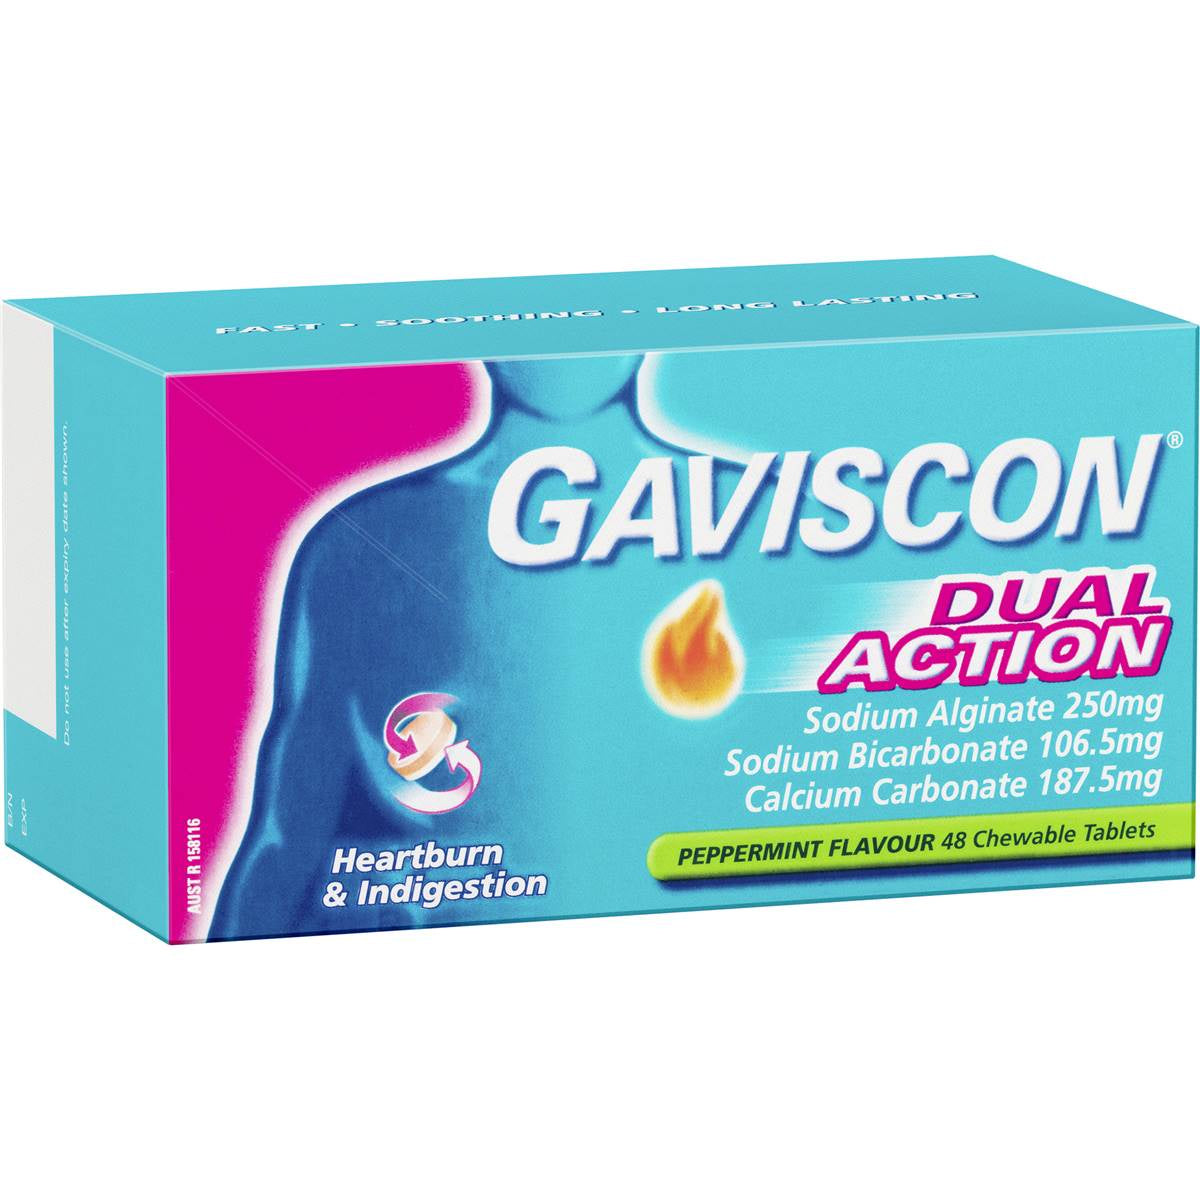 Gaviscon Dual Action Heartburn & Indigestion Chewable Tablets 48 Pack